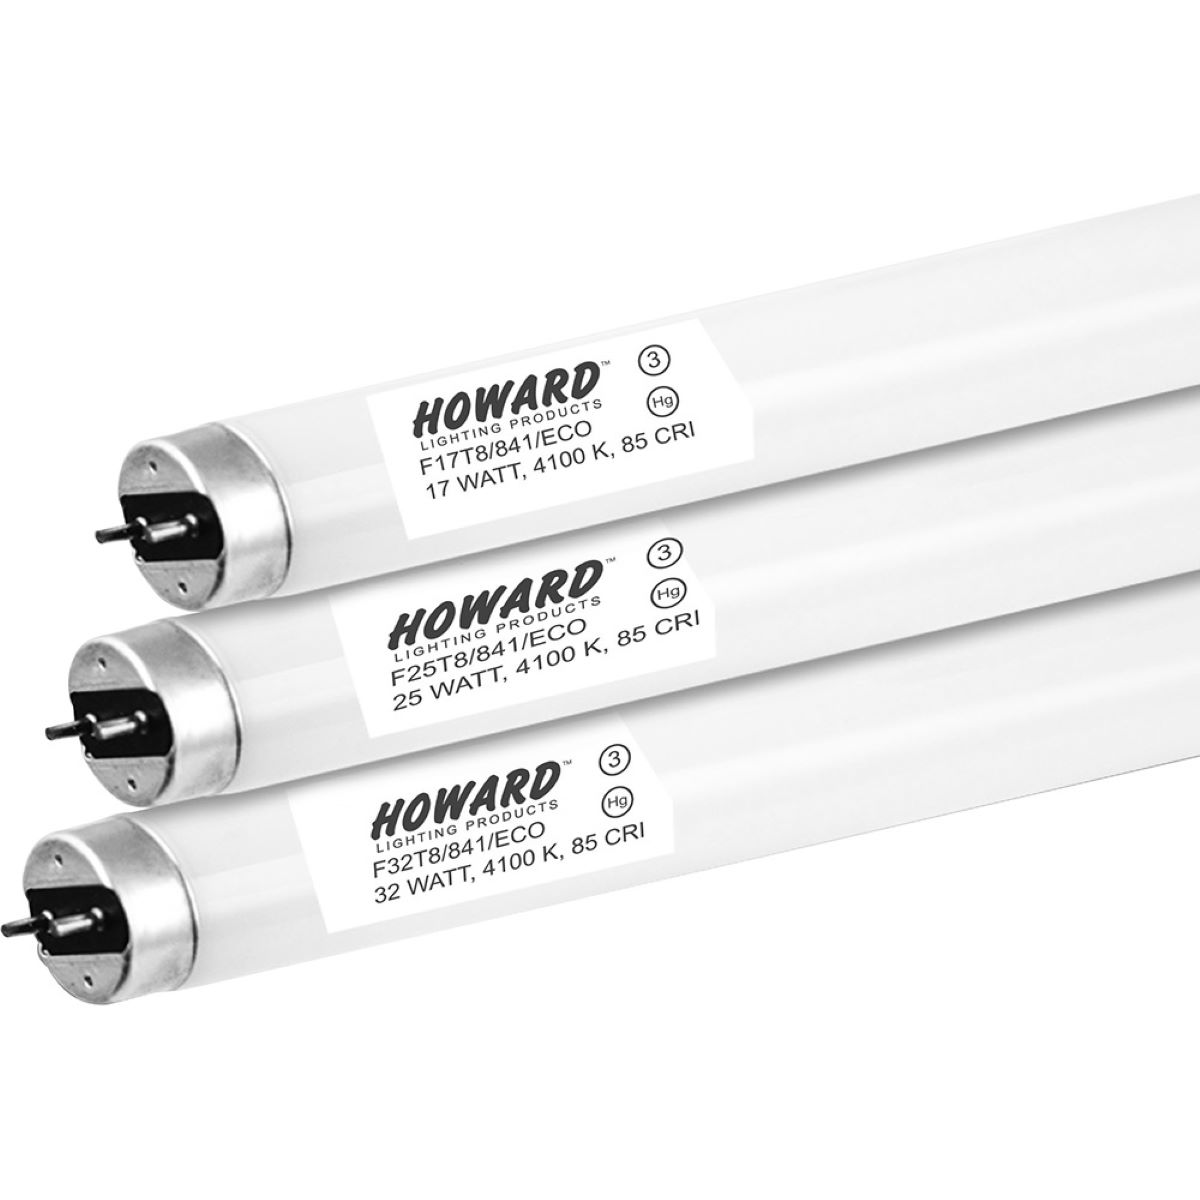 11 Best 48 Inch Fluorescent Tubes For 2023 1693525093 